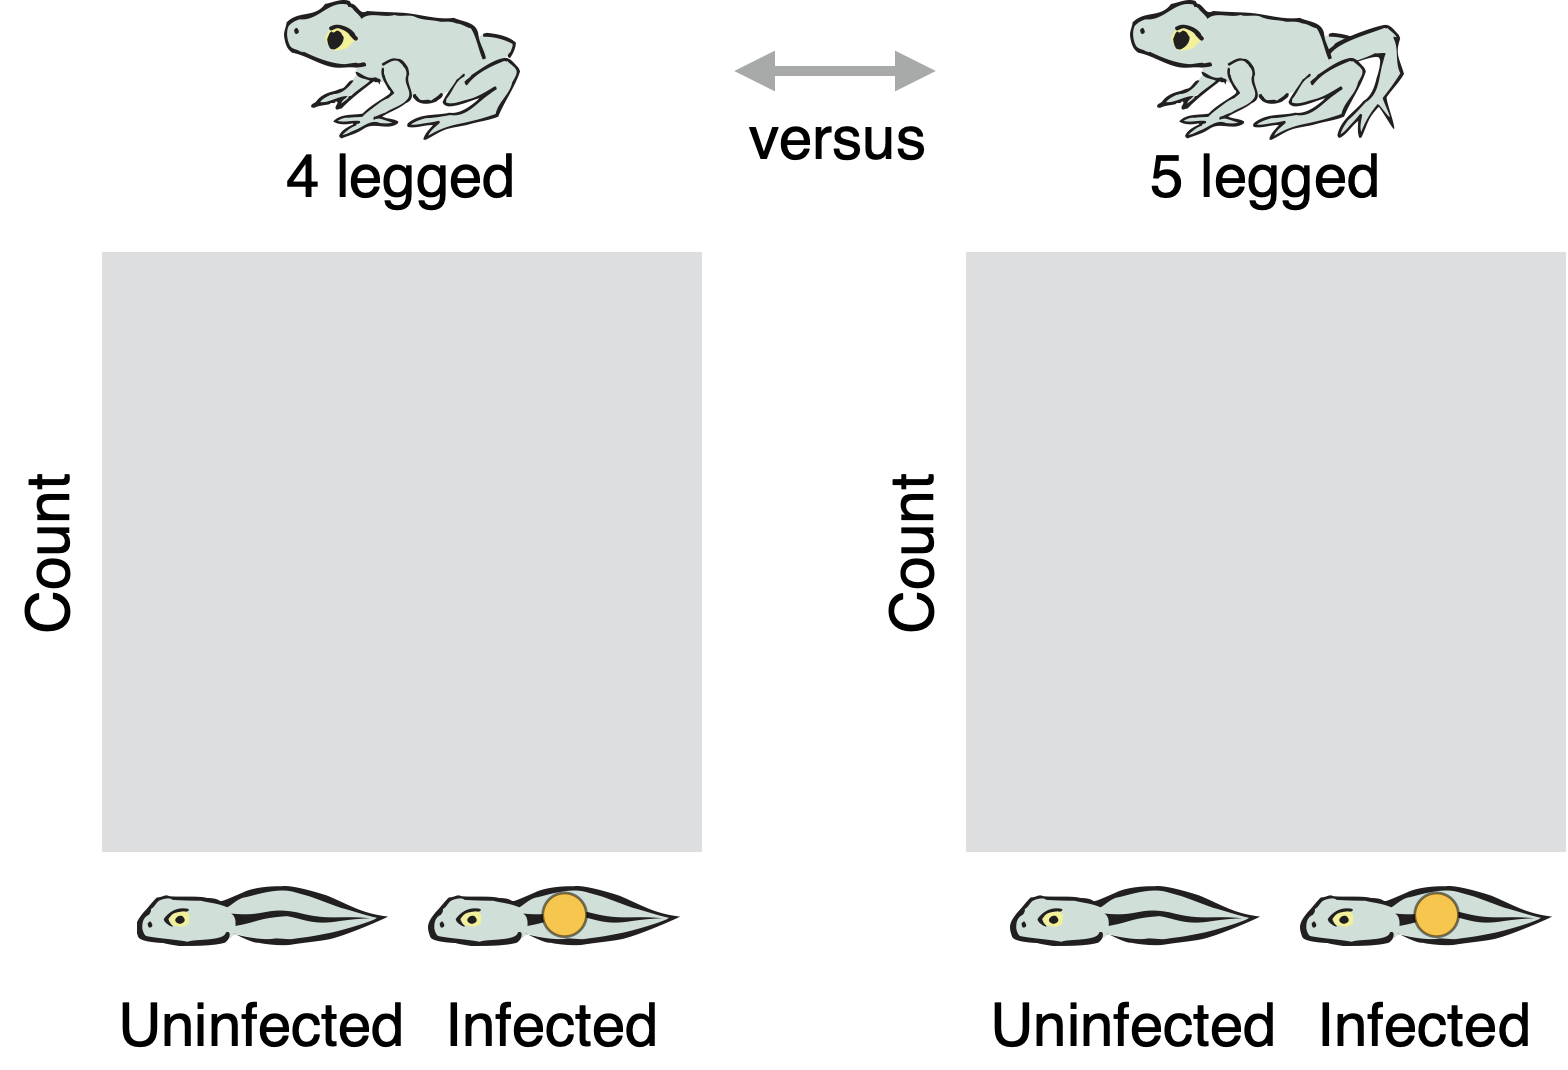 Diagram showing the setup for a pair of side-by-side graphs. The first graph is labeled 4 legged, with an illustration of a normal frog. The second graph is labeled 5 legged, with an illustration of a deformed frog. A double headed-arrow labeled versus sits between the illustrations. In both graphs, the vertical axis is Count and the horizontal axis has categories Uninfected and Infected, each illustrated with a cartoon tadpole.